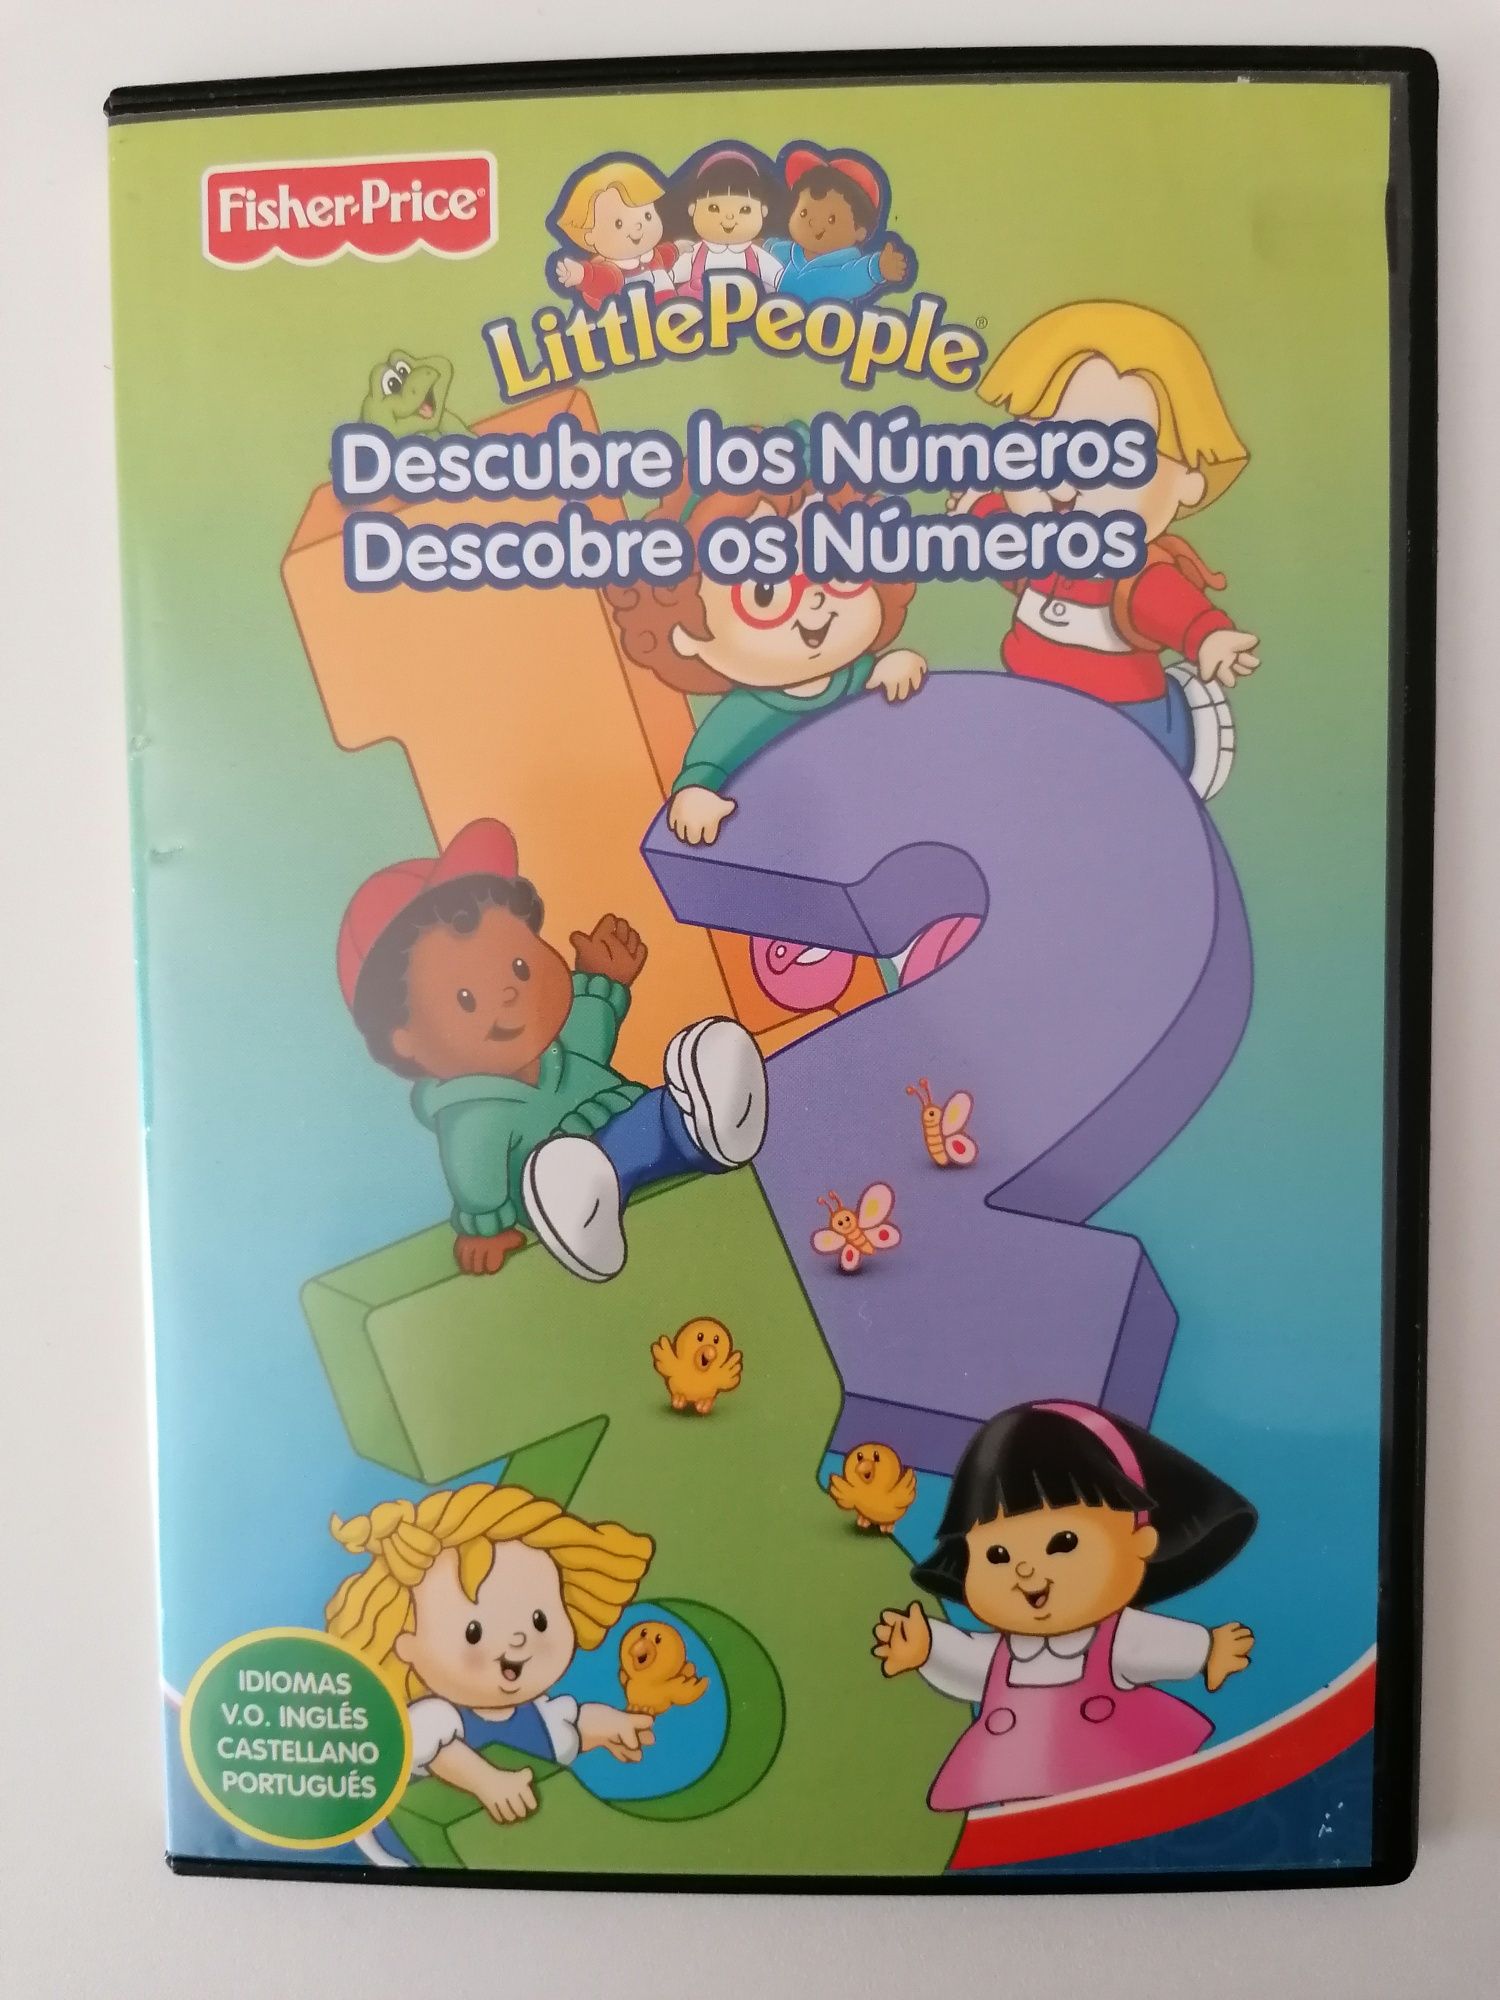 DVD Little People - Fisher Price